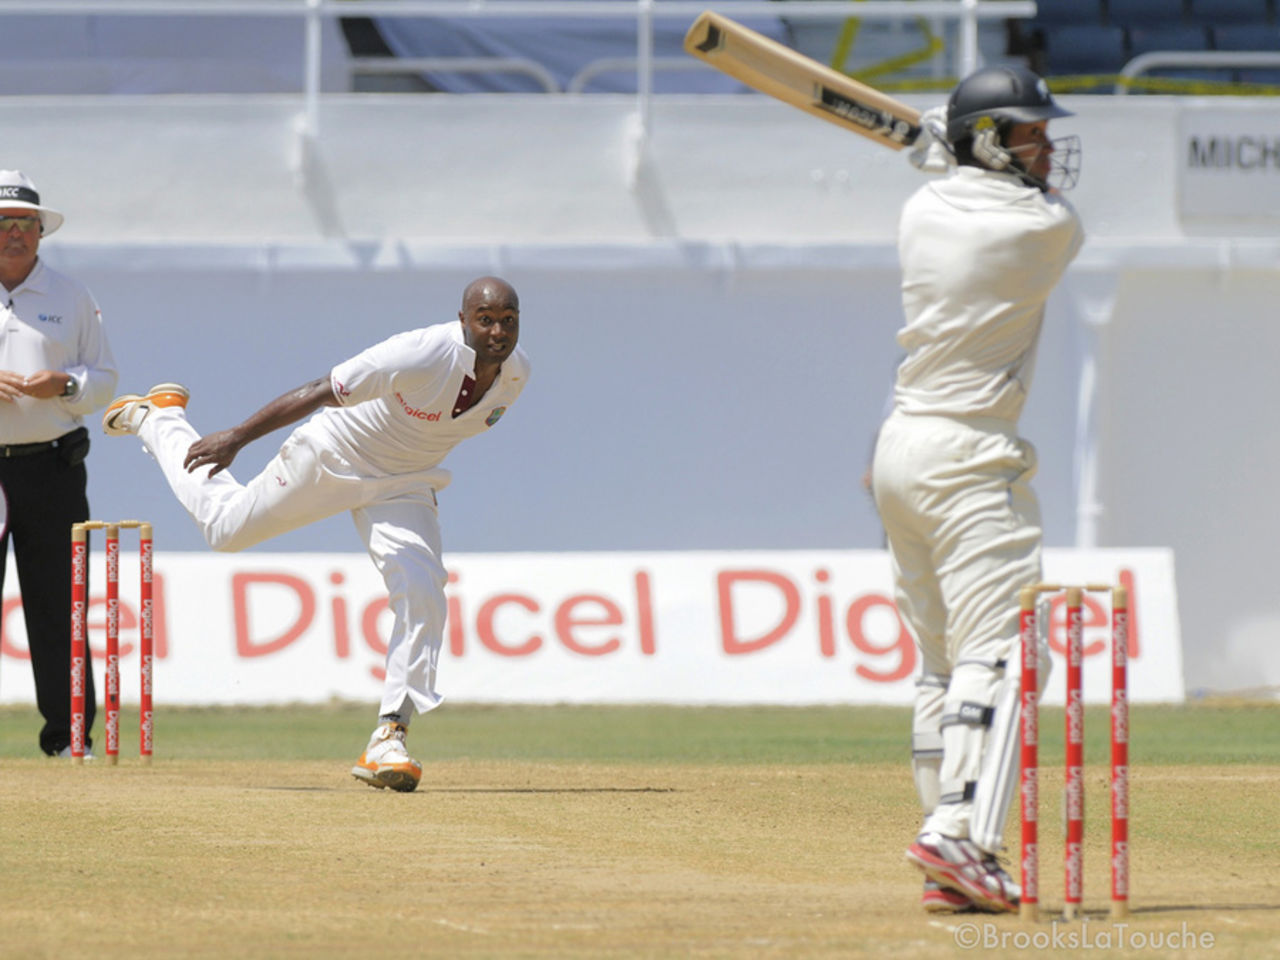 Ross Taylor slashes at a short delivery by Tino Best to be caught behind, West Indies v New Zealand, 2nd Test, Kingston, 3rd day, August 4, 2012